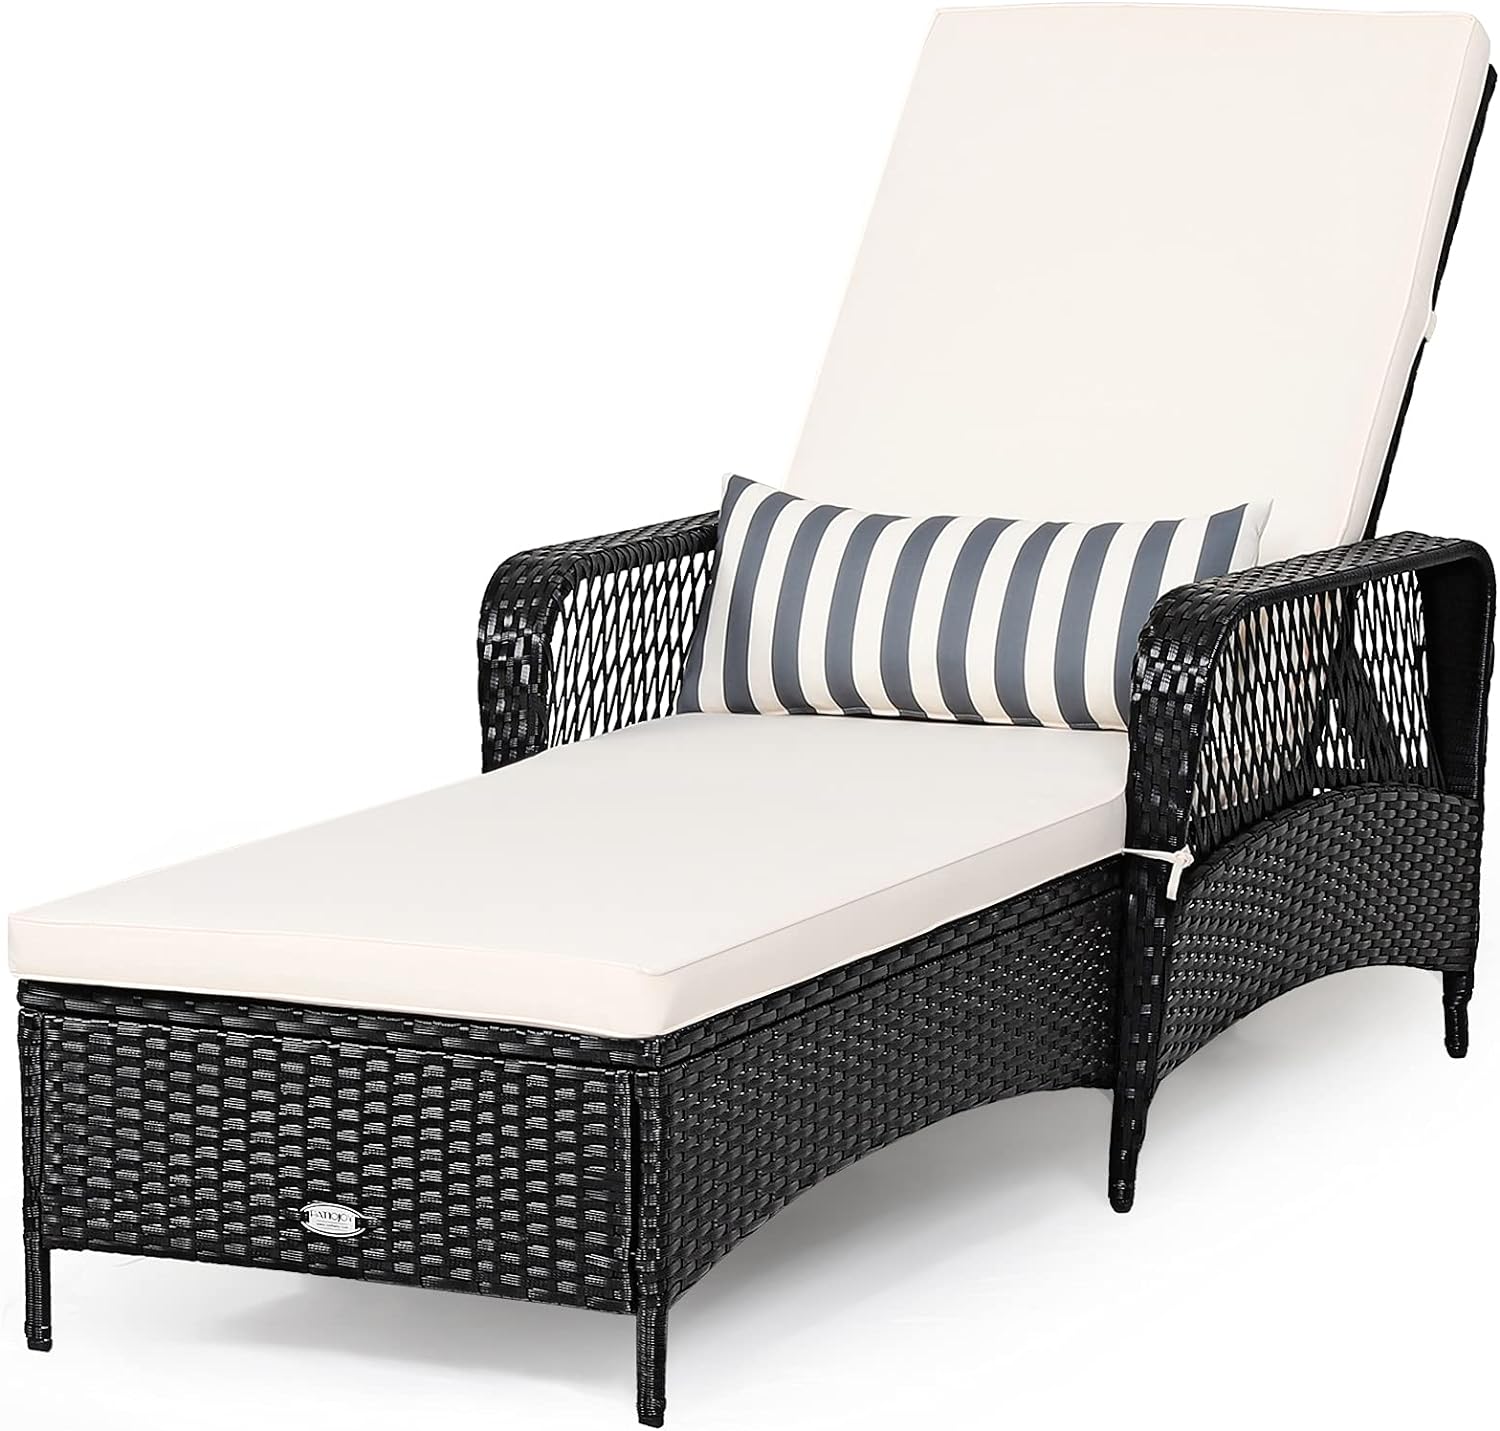 Tangkula Patio Wicker Chaise Lounge Chair, Outdoor Rattan Reclining Chaise w/ 6-Gear Adjustable Backrest, Thick Padded Cushion & Removable Lumbar Pillow, Ideal for Lawn, Beach, Balcony (Black)